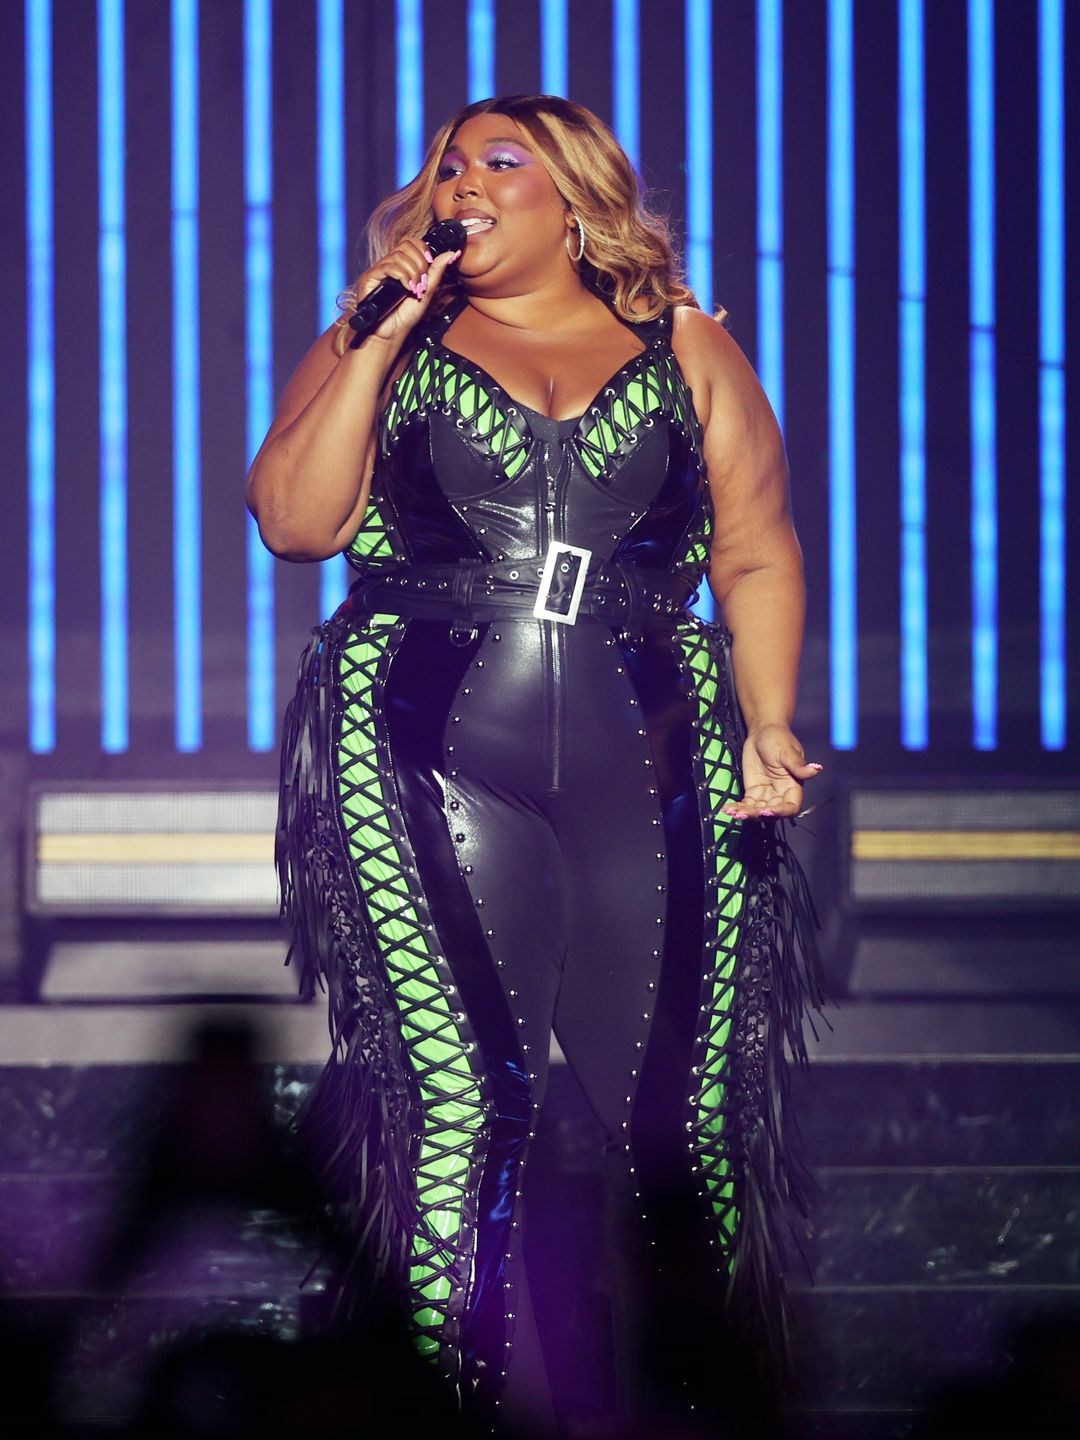  Lizzo performs at Qudos Bank Arena in Sydney wearing black leather catsuit with neon green detailing